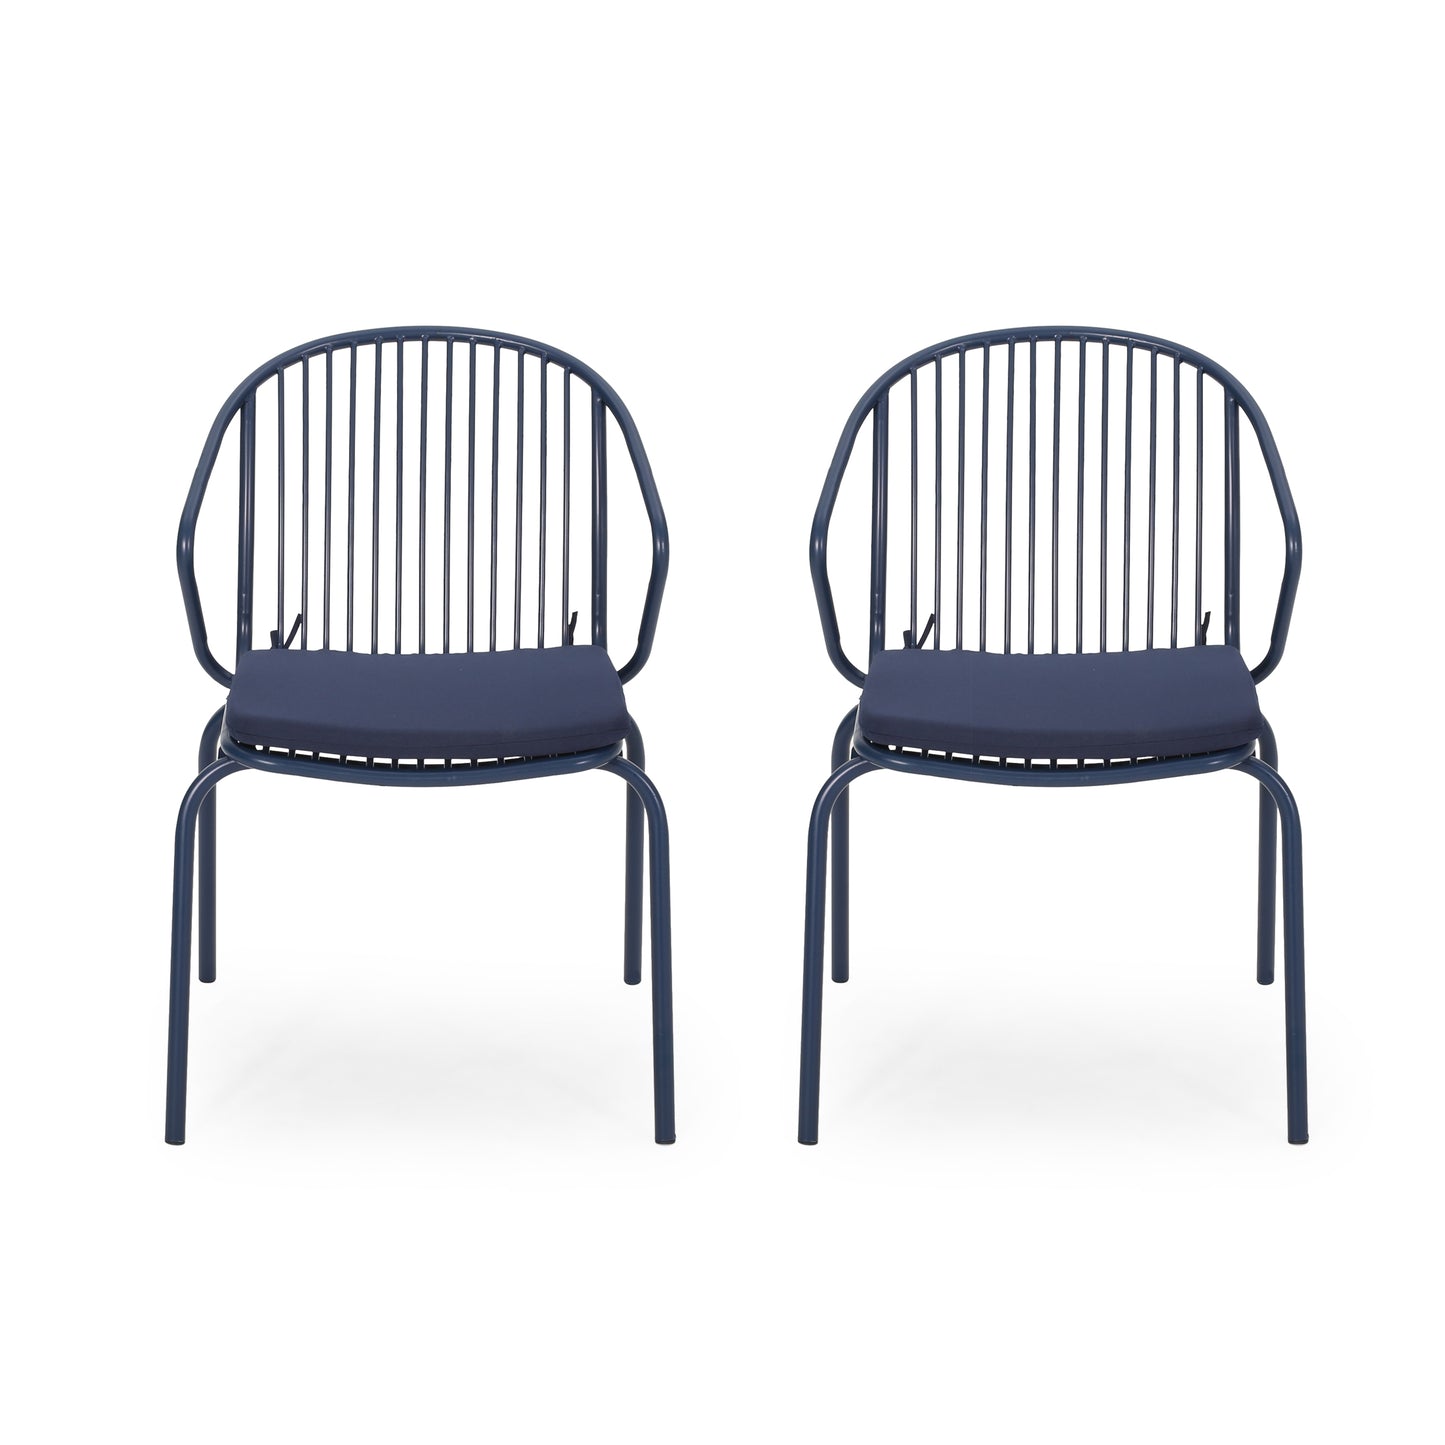 Emily Outdoor Modern Iron Club Chair with Cushion (Set of 2)